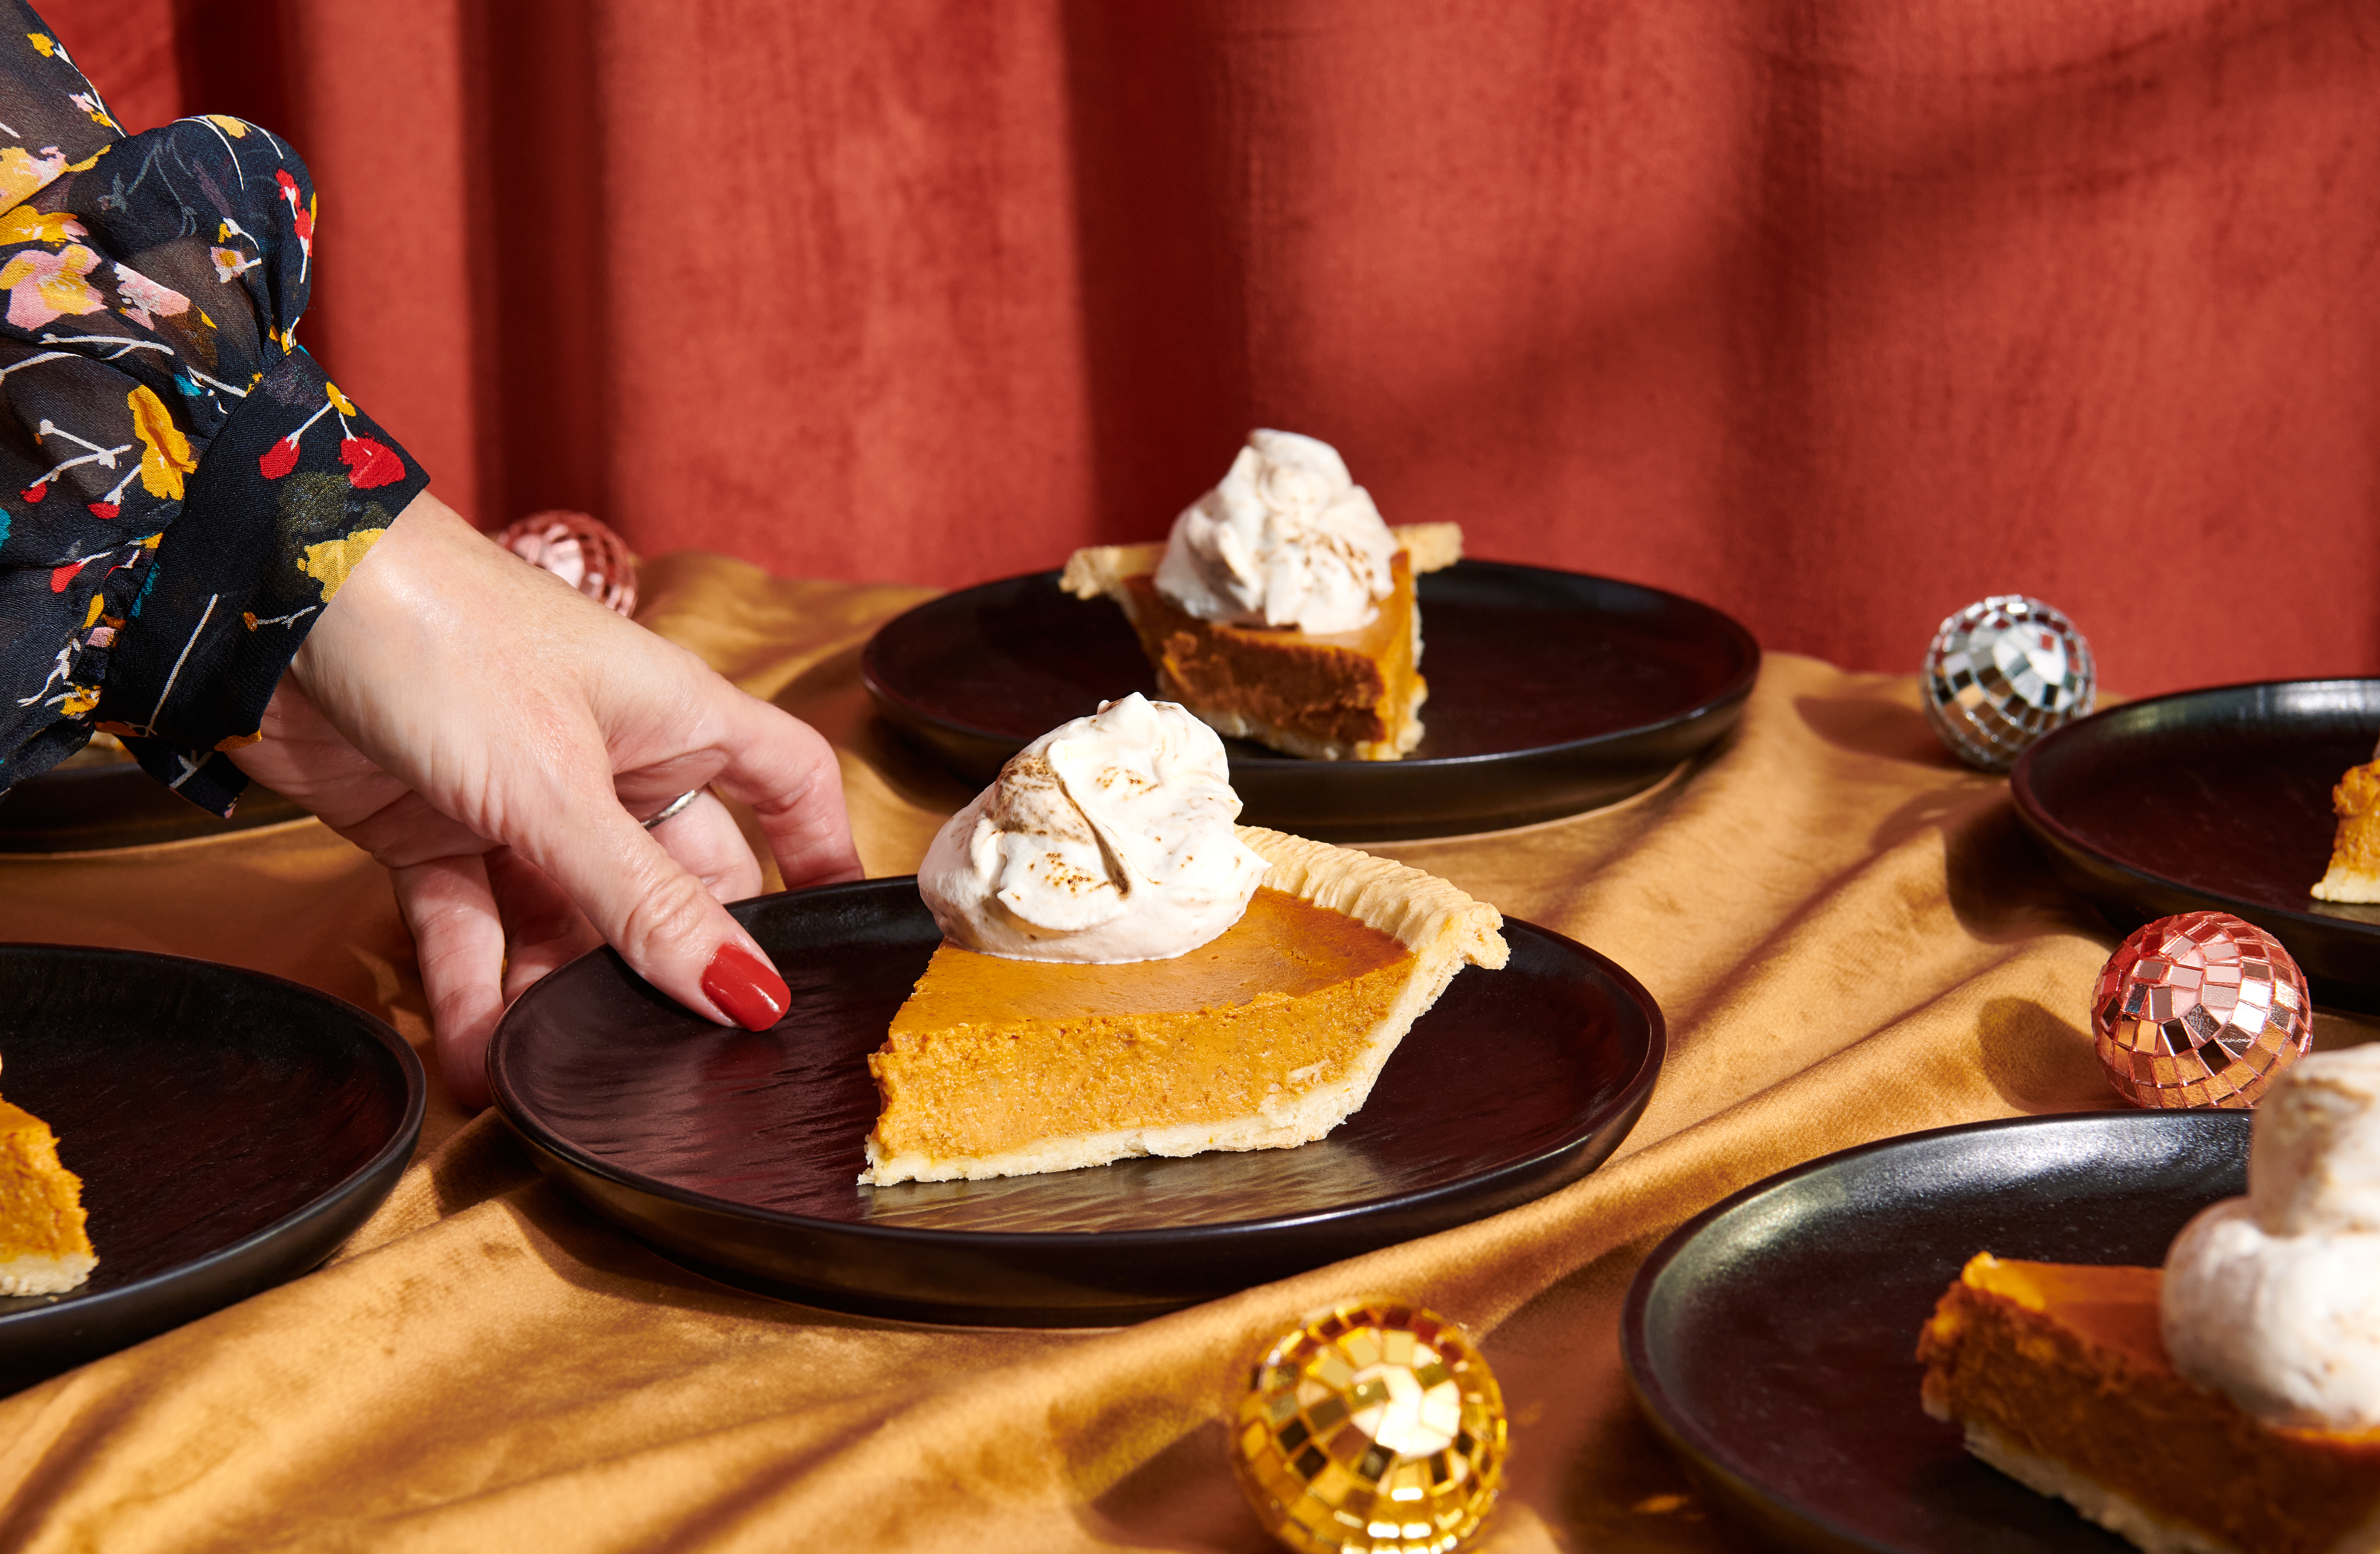 Hand reaching for a plate with a slice of pumpking pie and whipped cream on top.